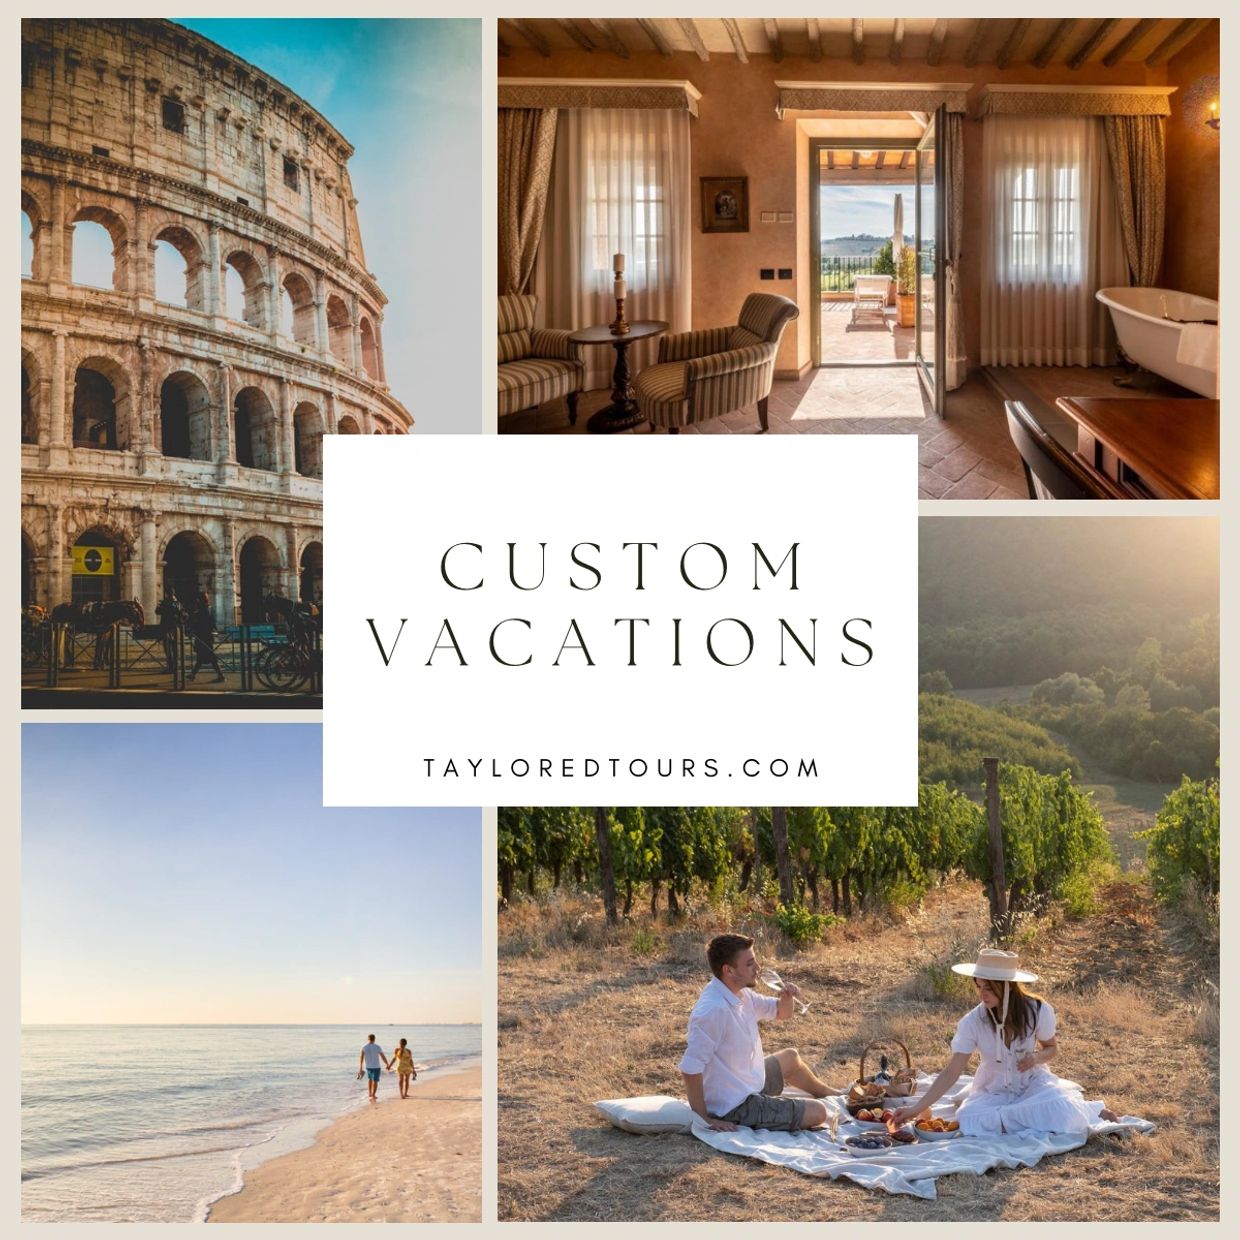 Custom Vacations with Taylored Tours